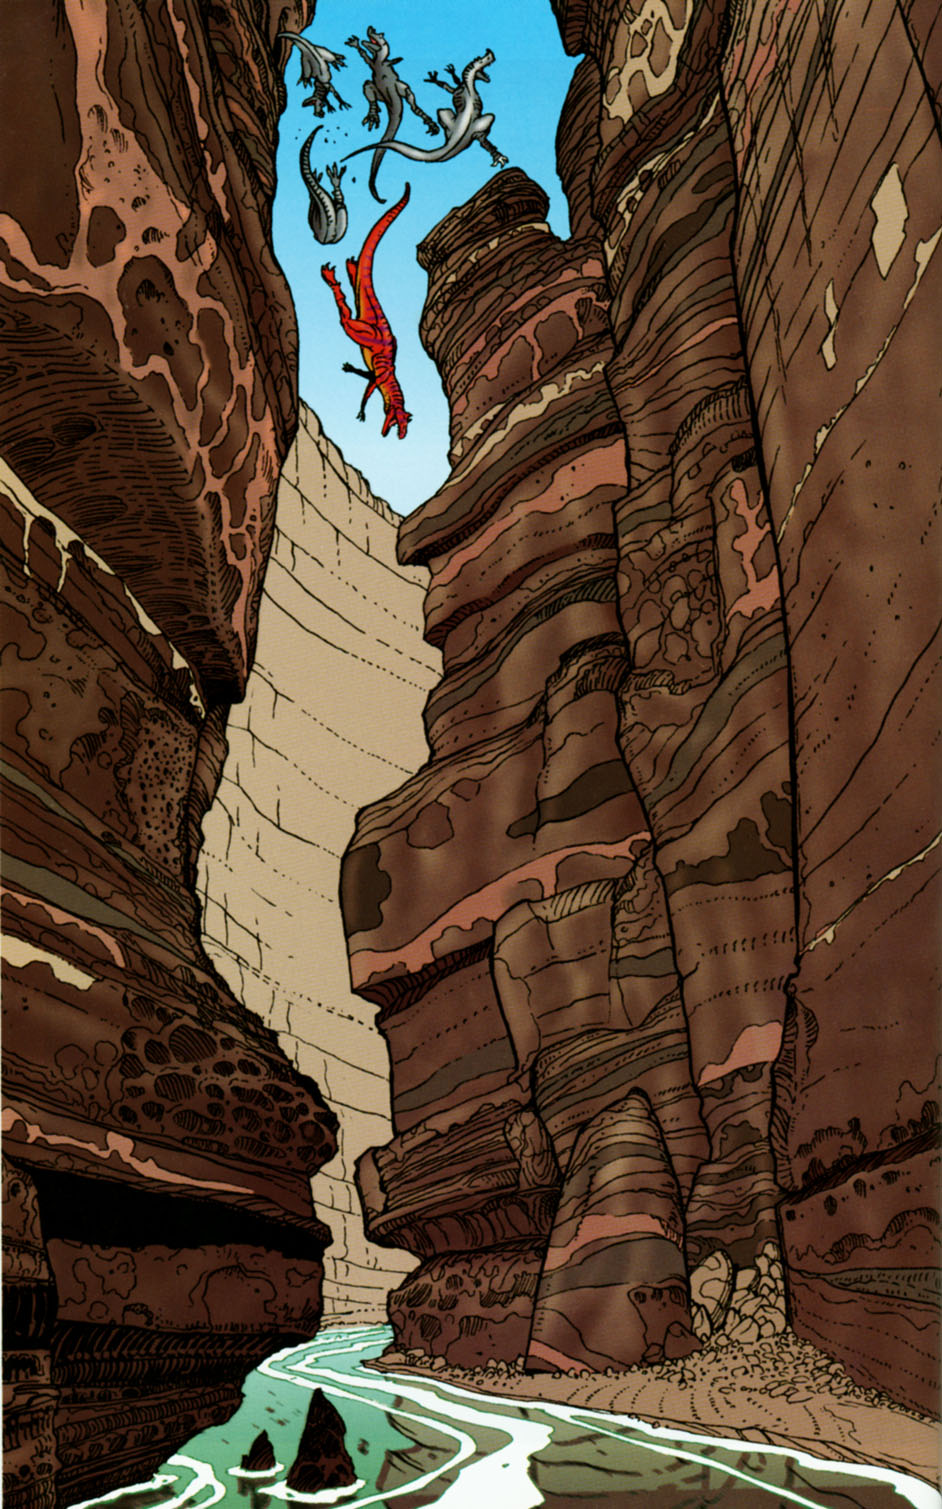 Age of Reptiles: The Hunt issue 1 - Page 32